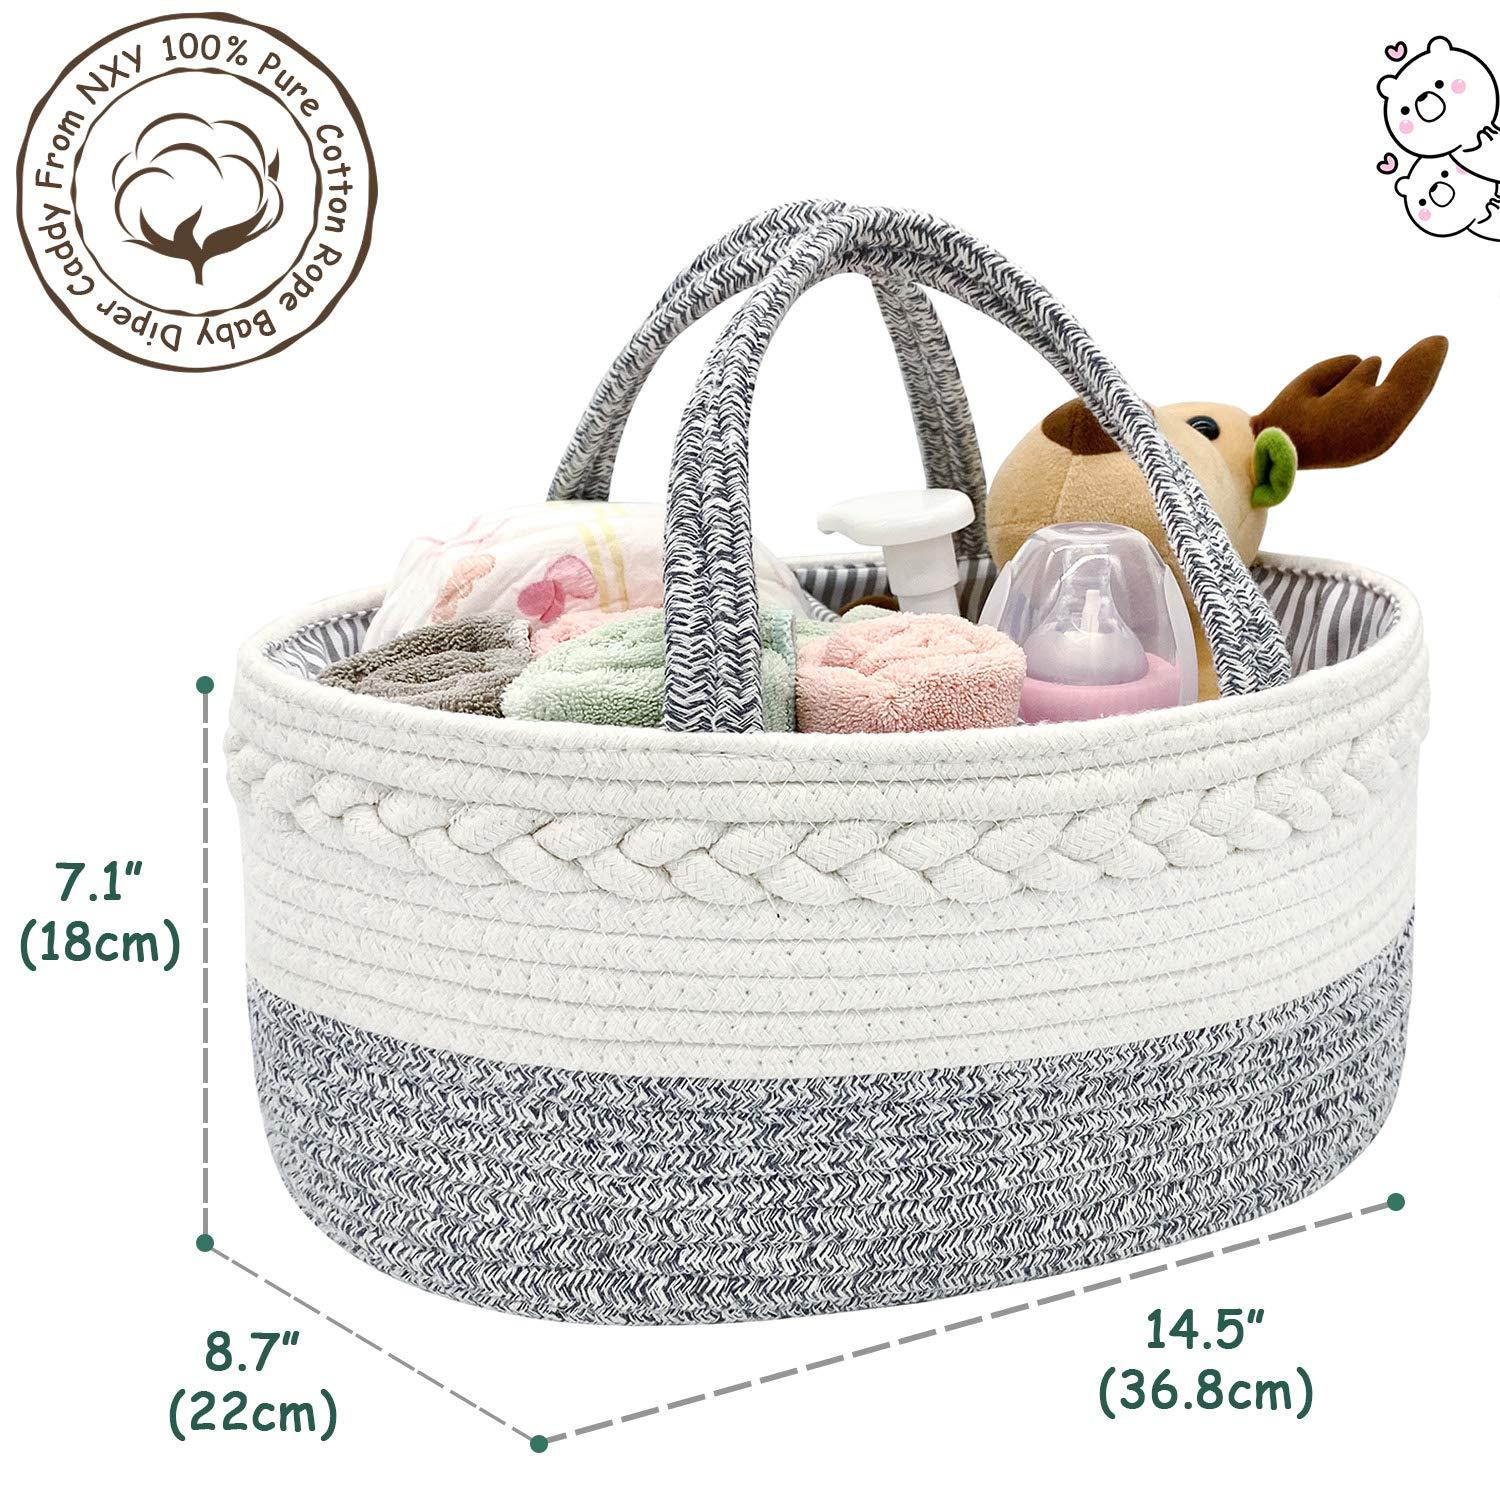 Organic Cotton Rope Diaper Caddy Nappy storage Basket Woven Nursery Cubby  Bin and Organizer for Baby Room Organization PINK 